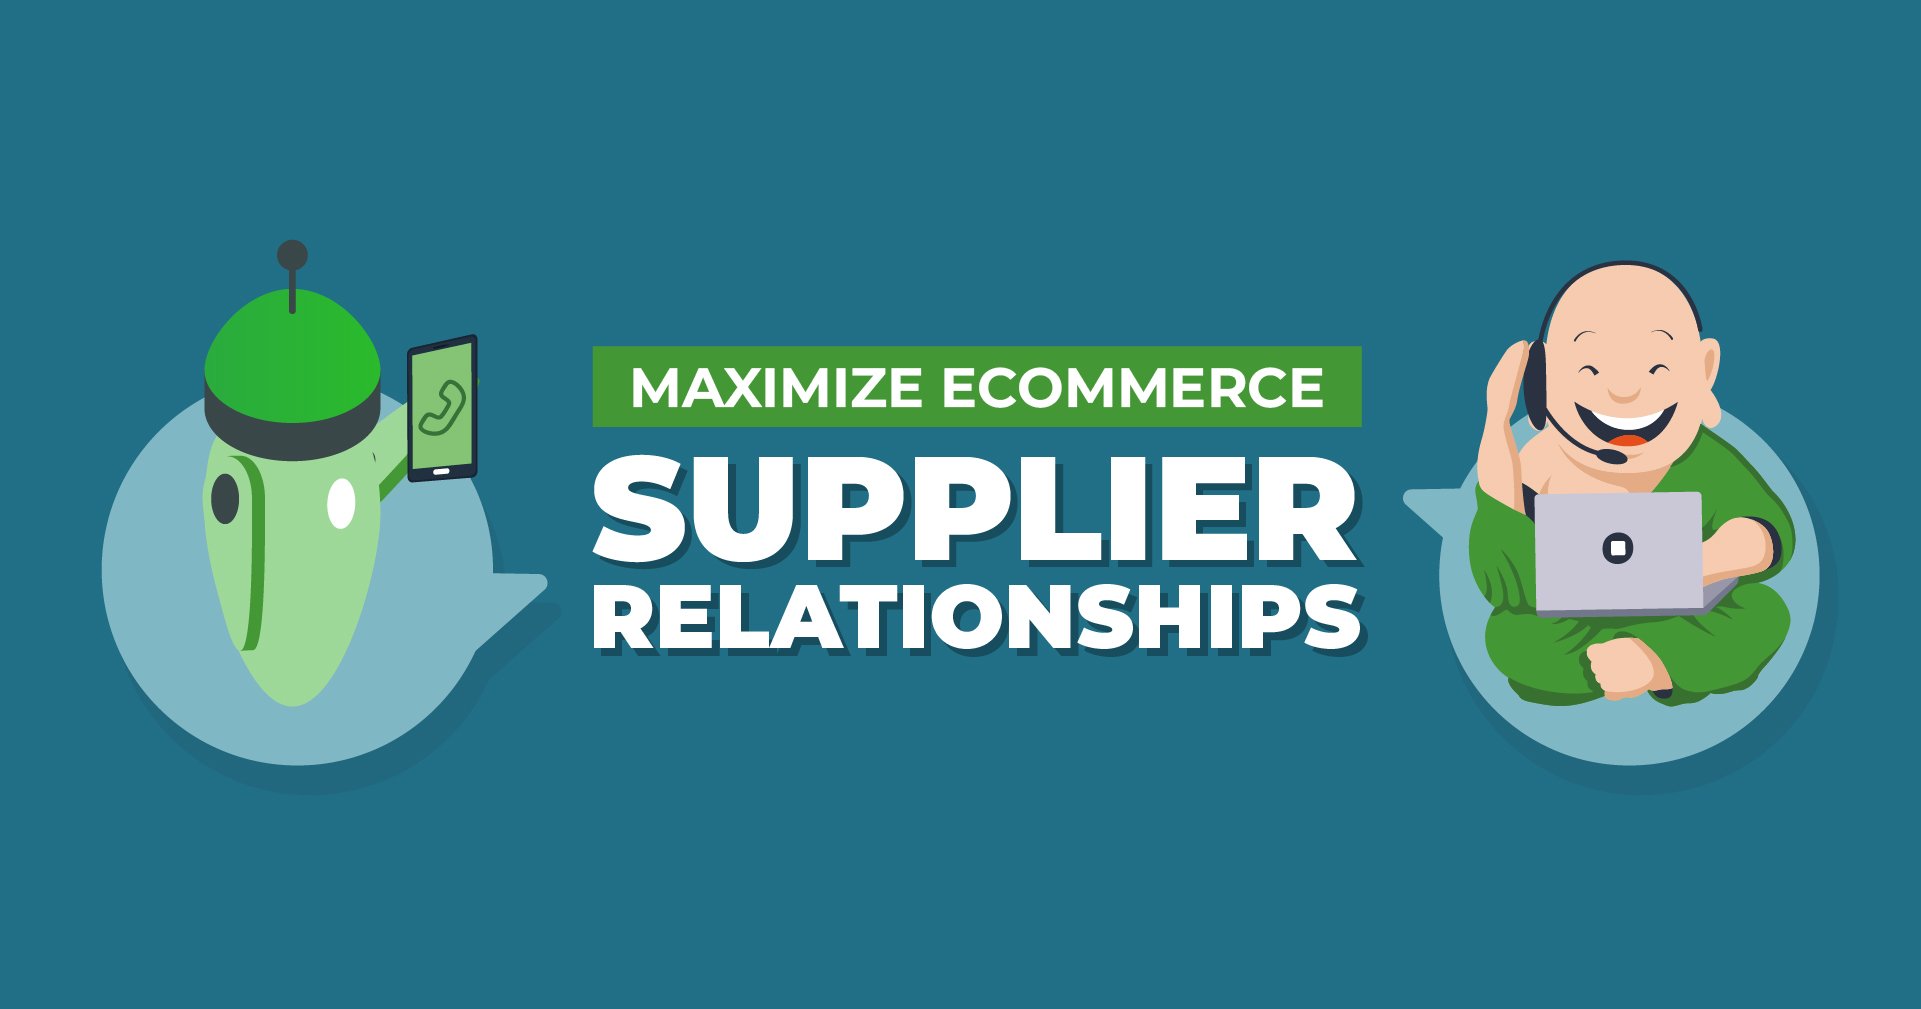 Maximize Ecommerce Supplier Relationships